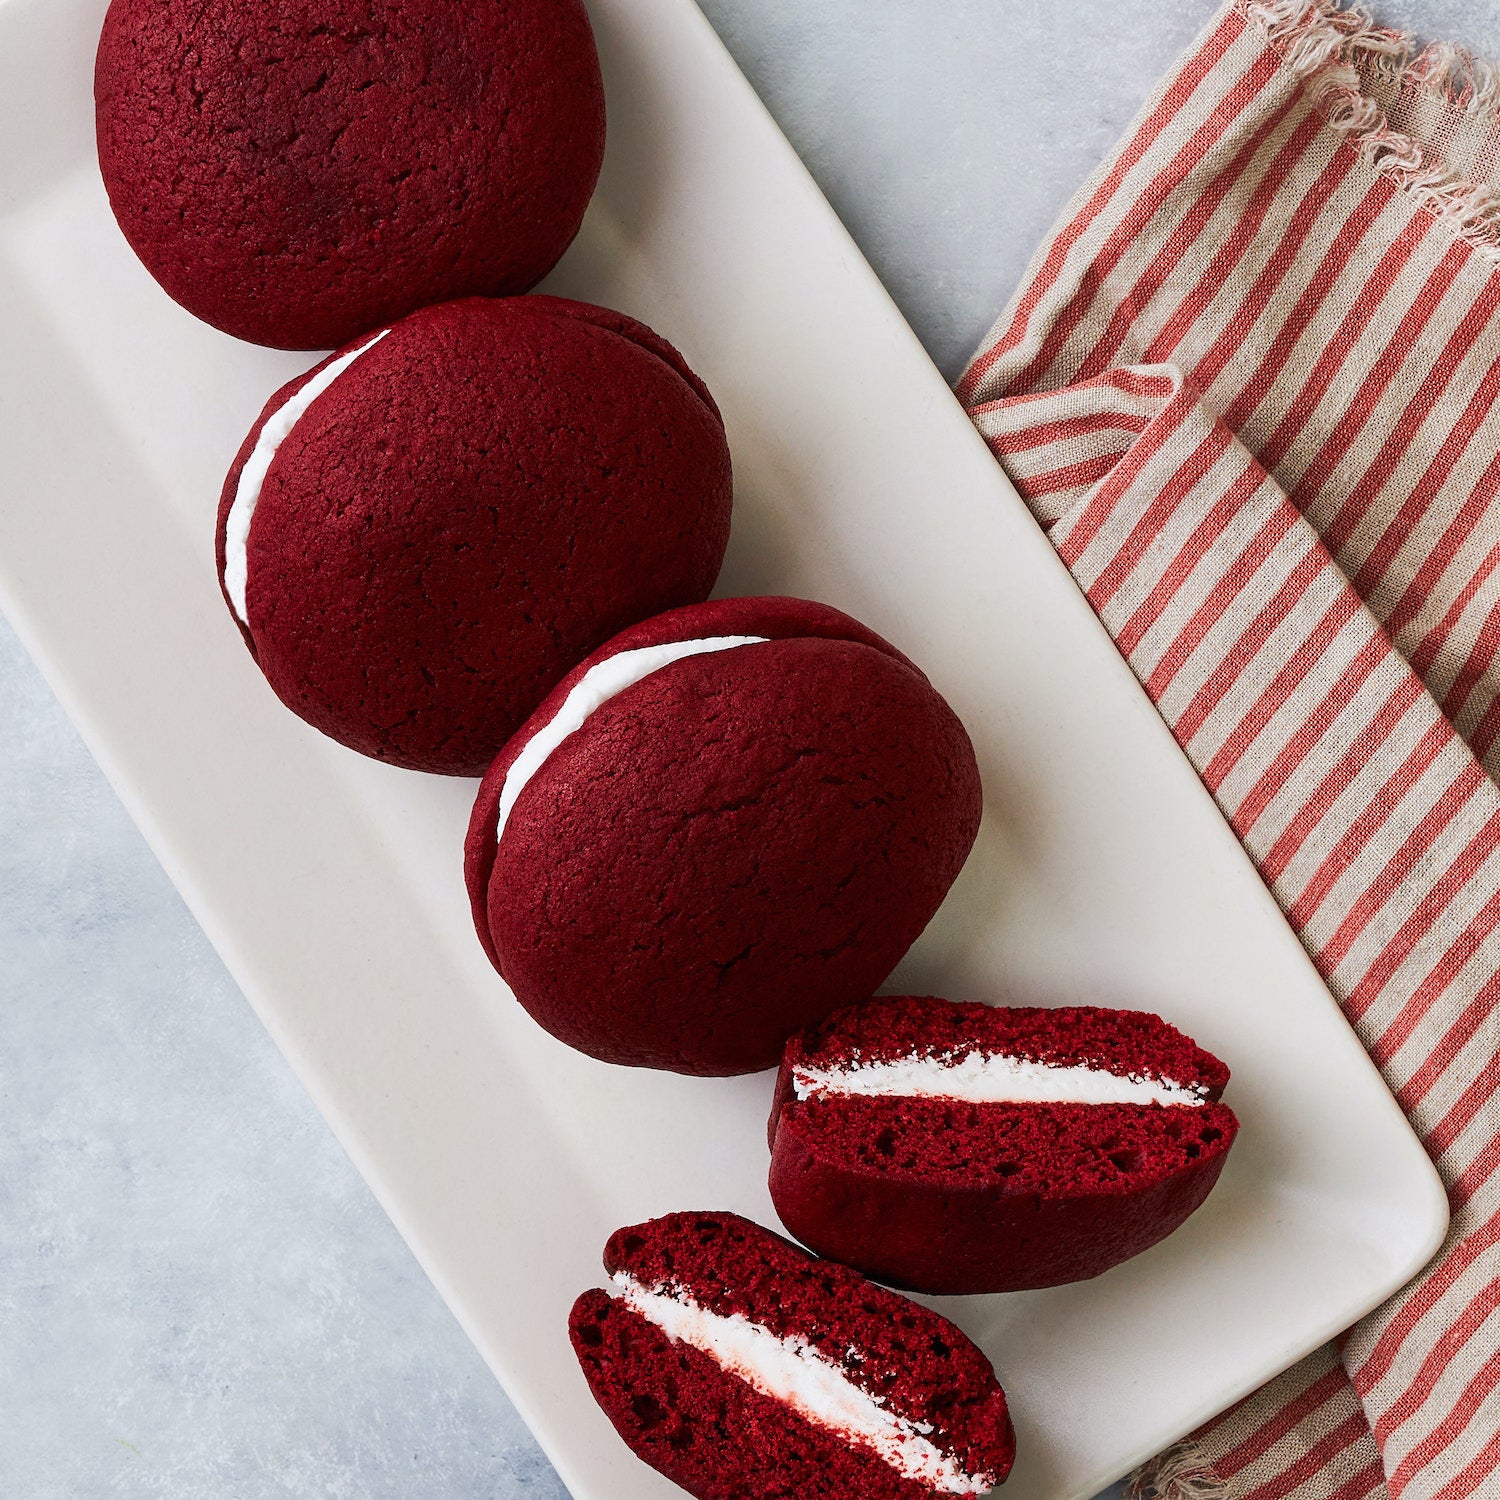 This photo shows the 4 pack of Red velvet whoopie pies with one cut in half showing a cross section of the moist cake and creamy filling 